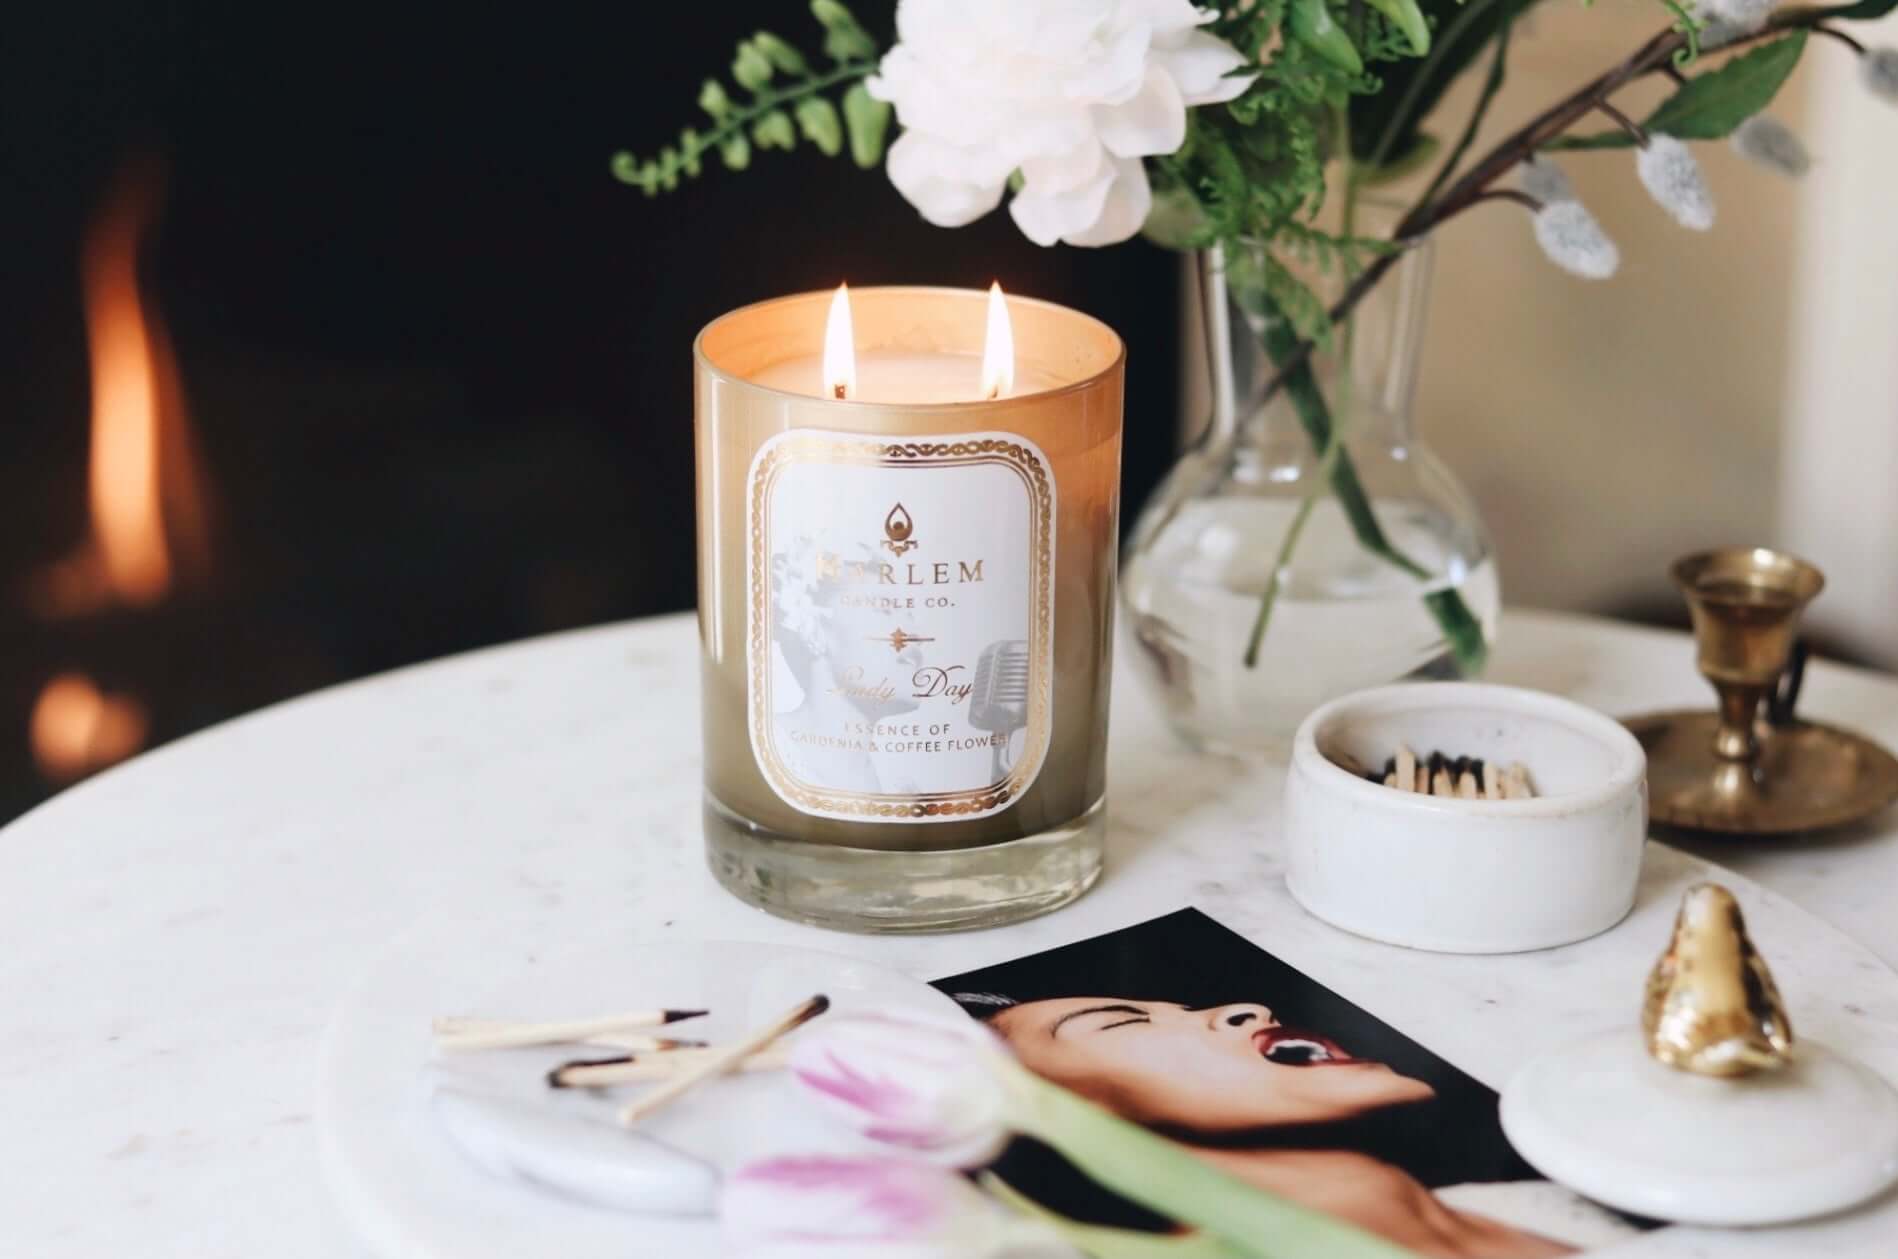 A lifestyle image of our Lady Day Gold 12 oz 2 wick, lit candle, on a white nightstand with photographs of Billie Holiday and greenery surrounding, and a gorgeous fire in the fireplace in the background.